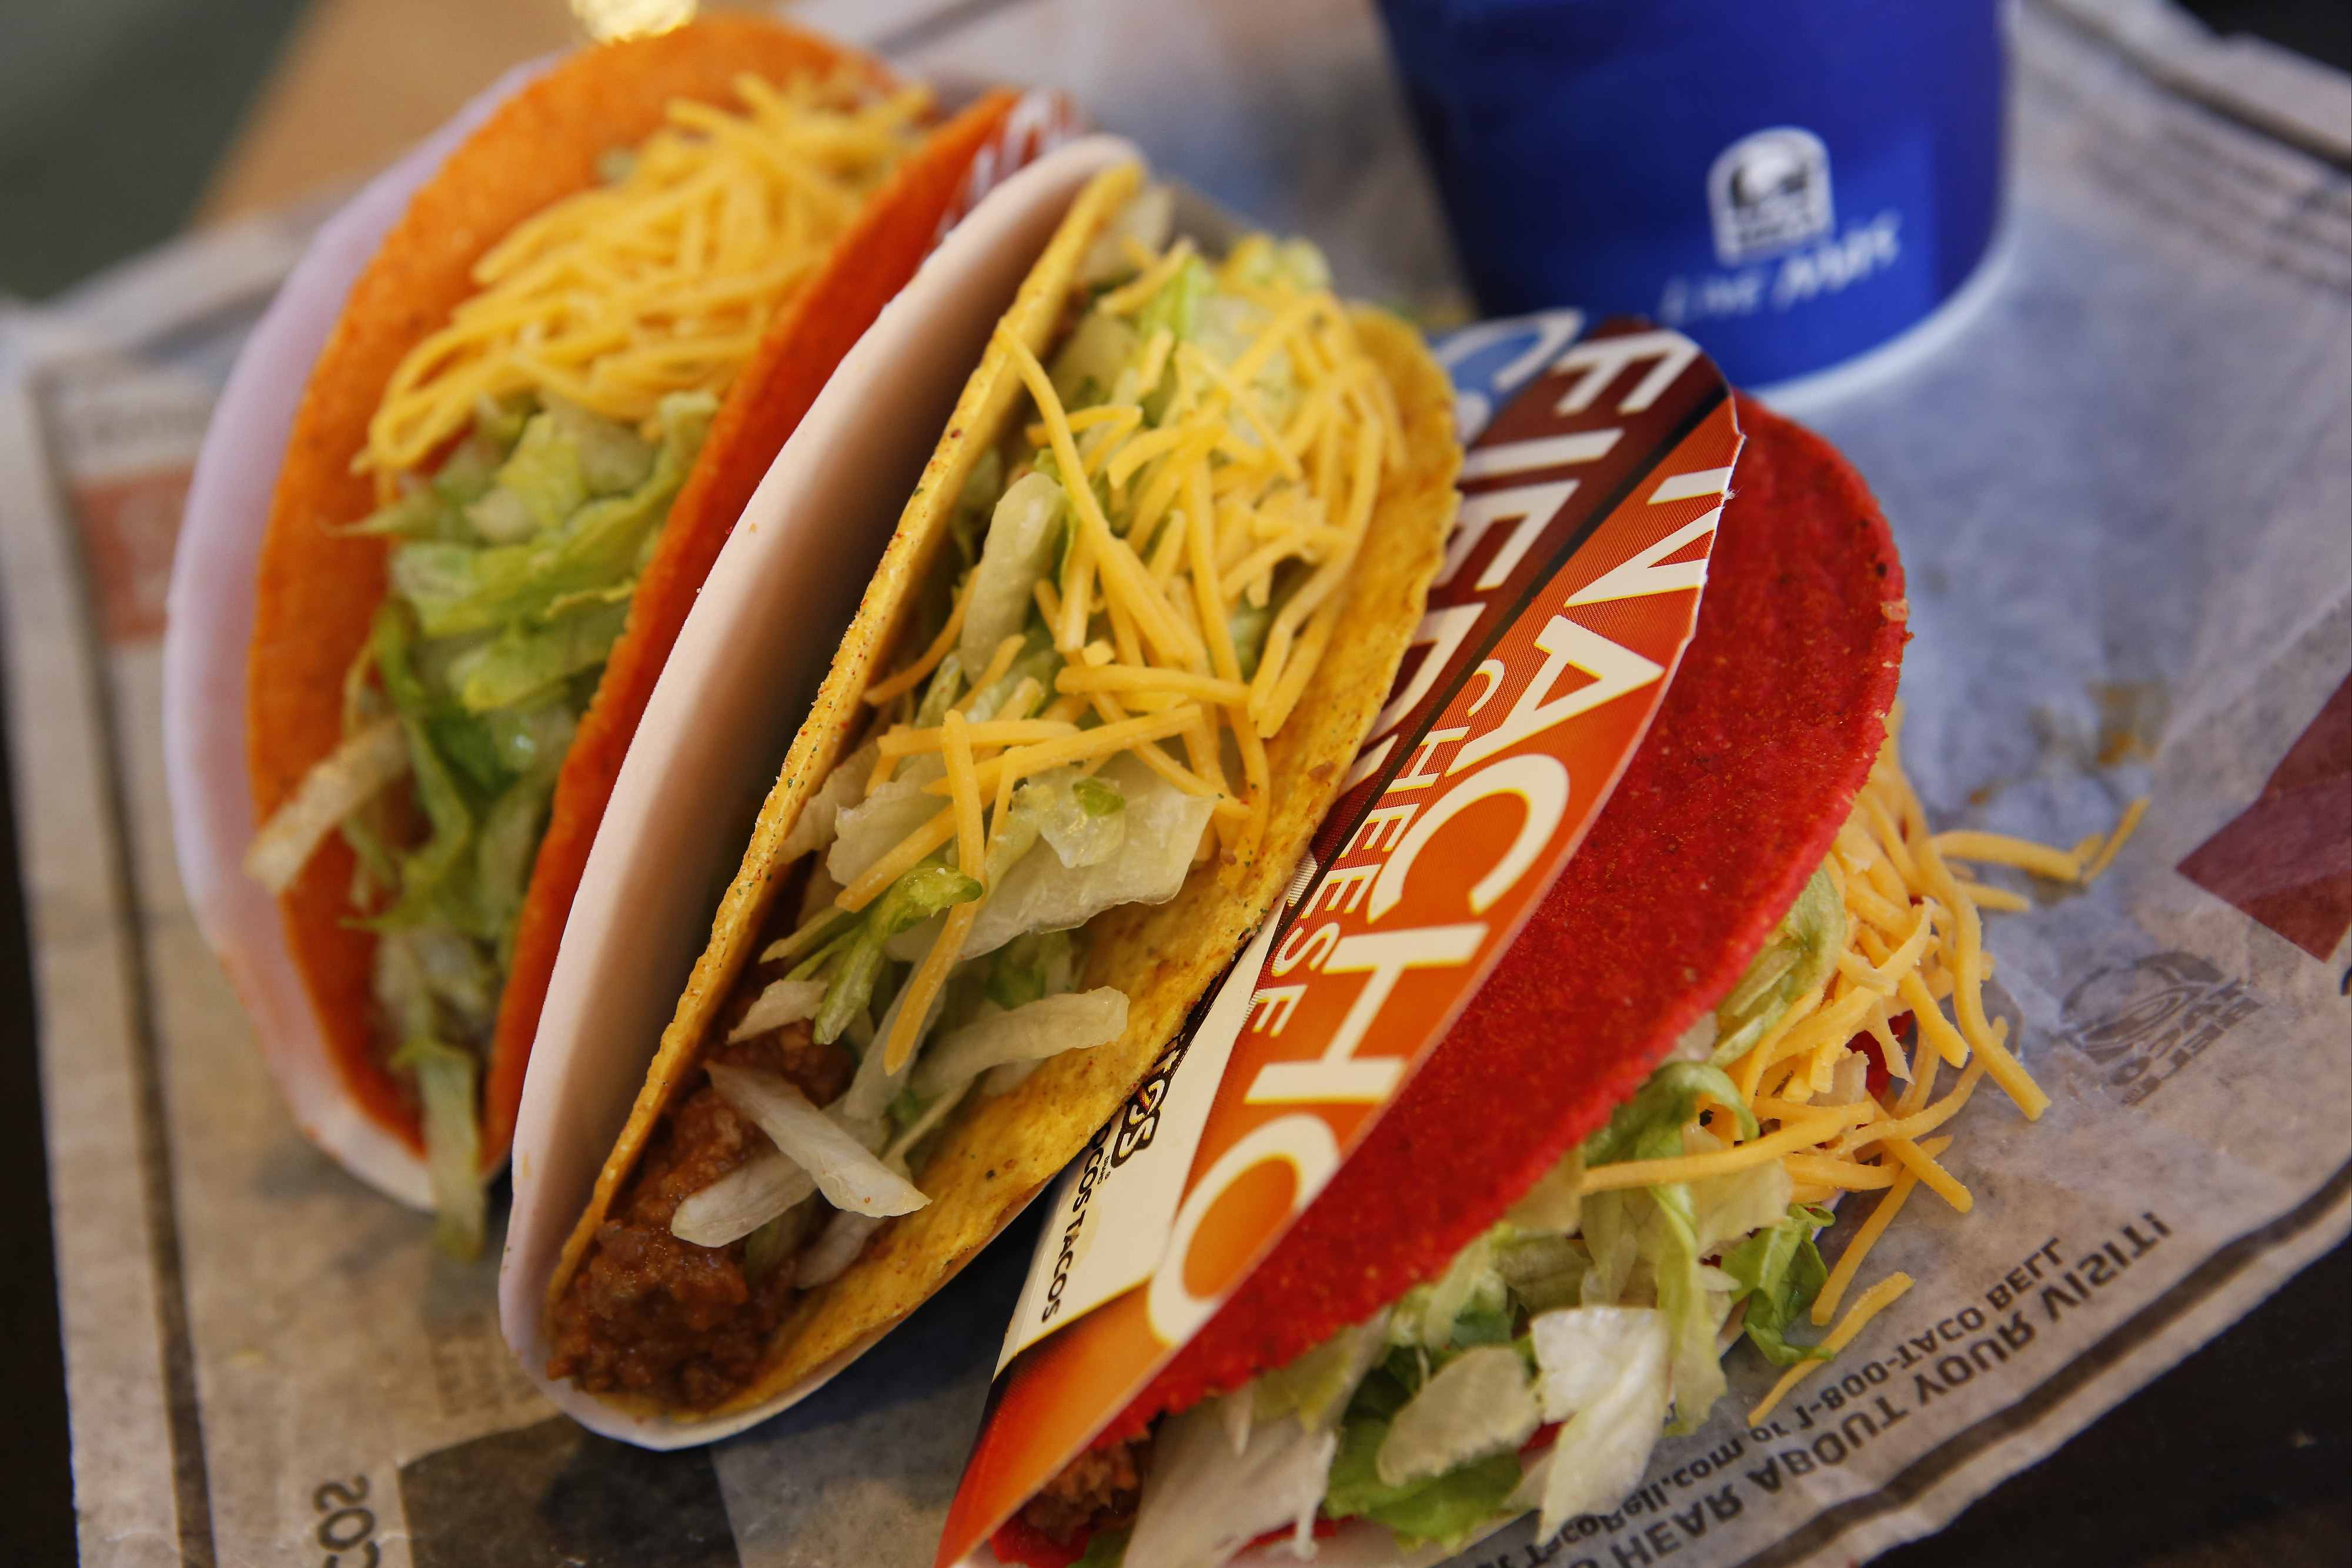 You Can Get a Free Taco at Taco Bell Today